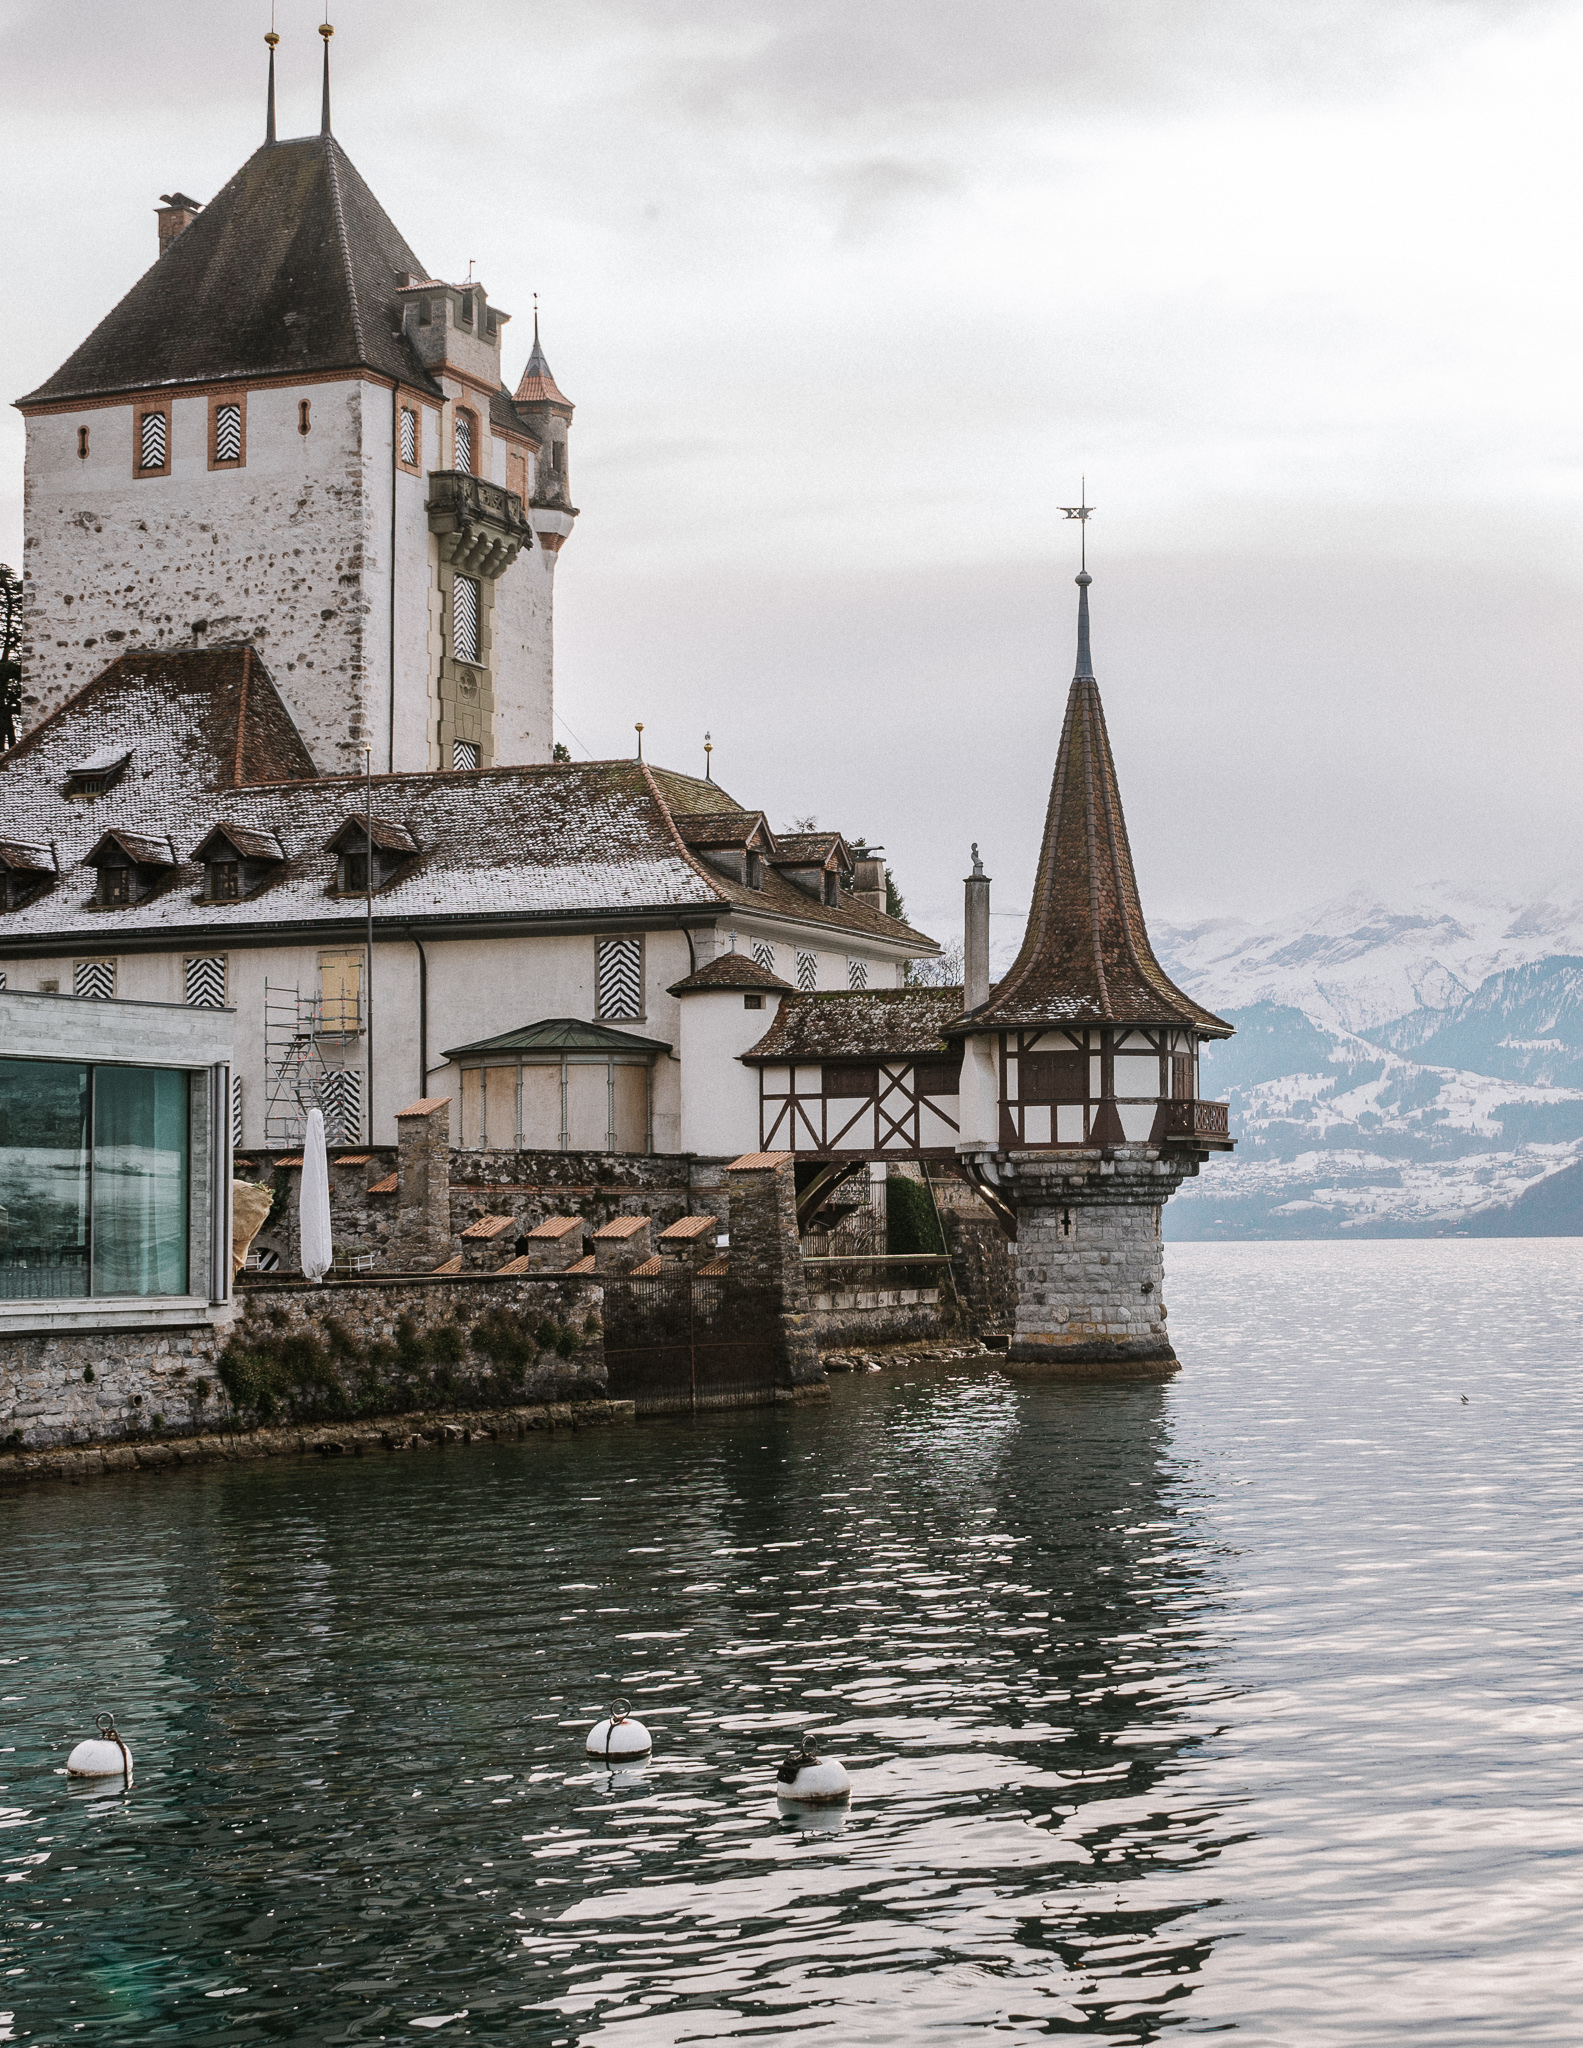 berhofen Castle and Thun lake in winter in Switzerland, with snowy mountains in the background